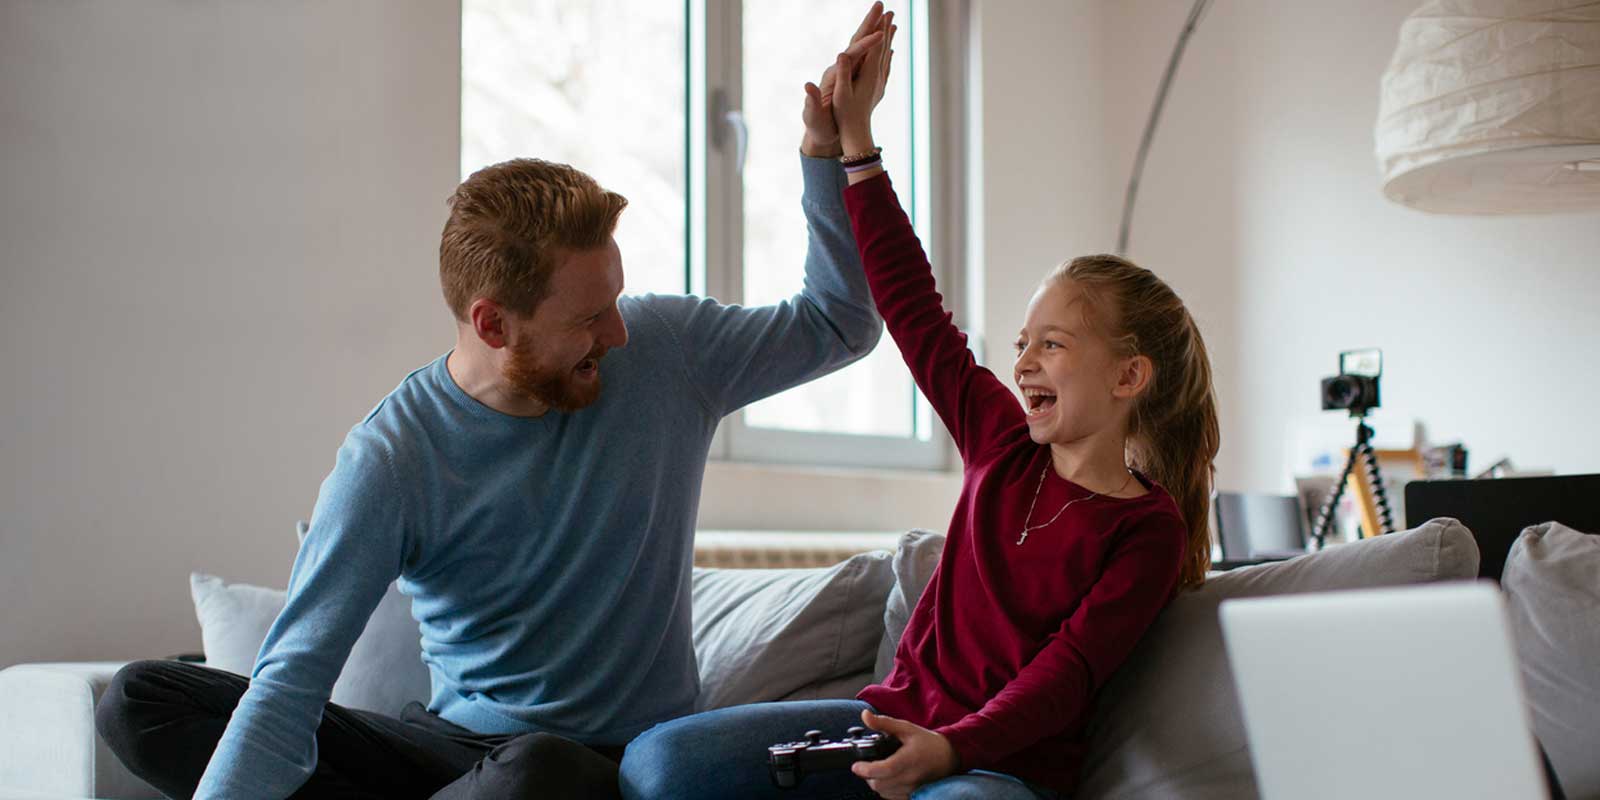 Daughter giving her dad a high five while playing a computer game